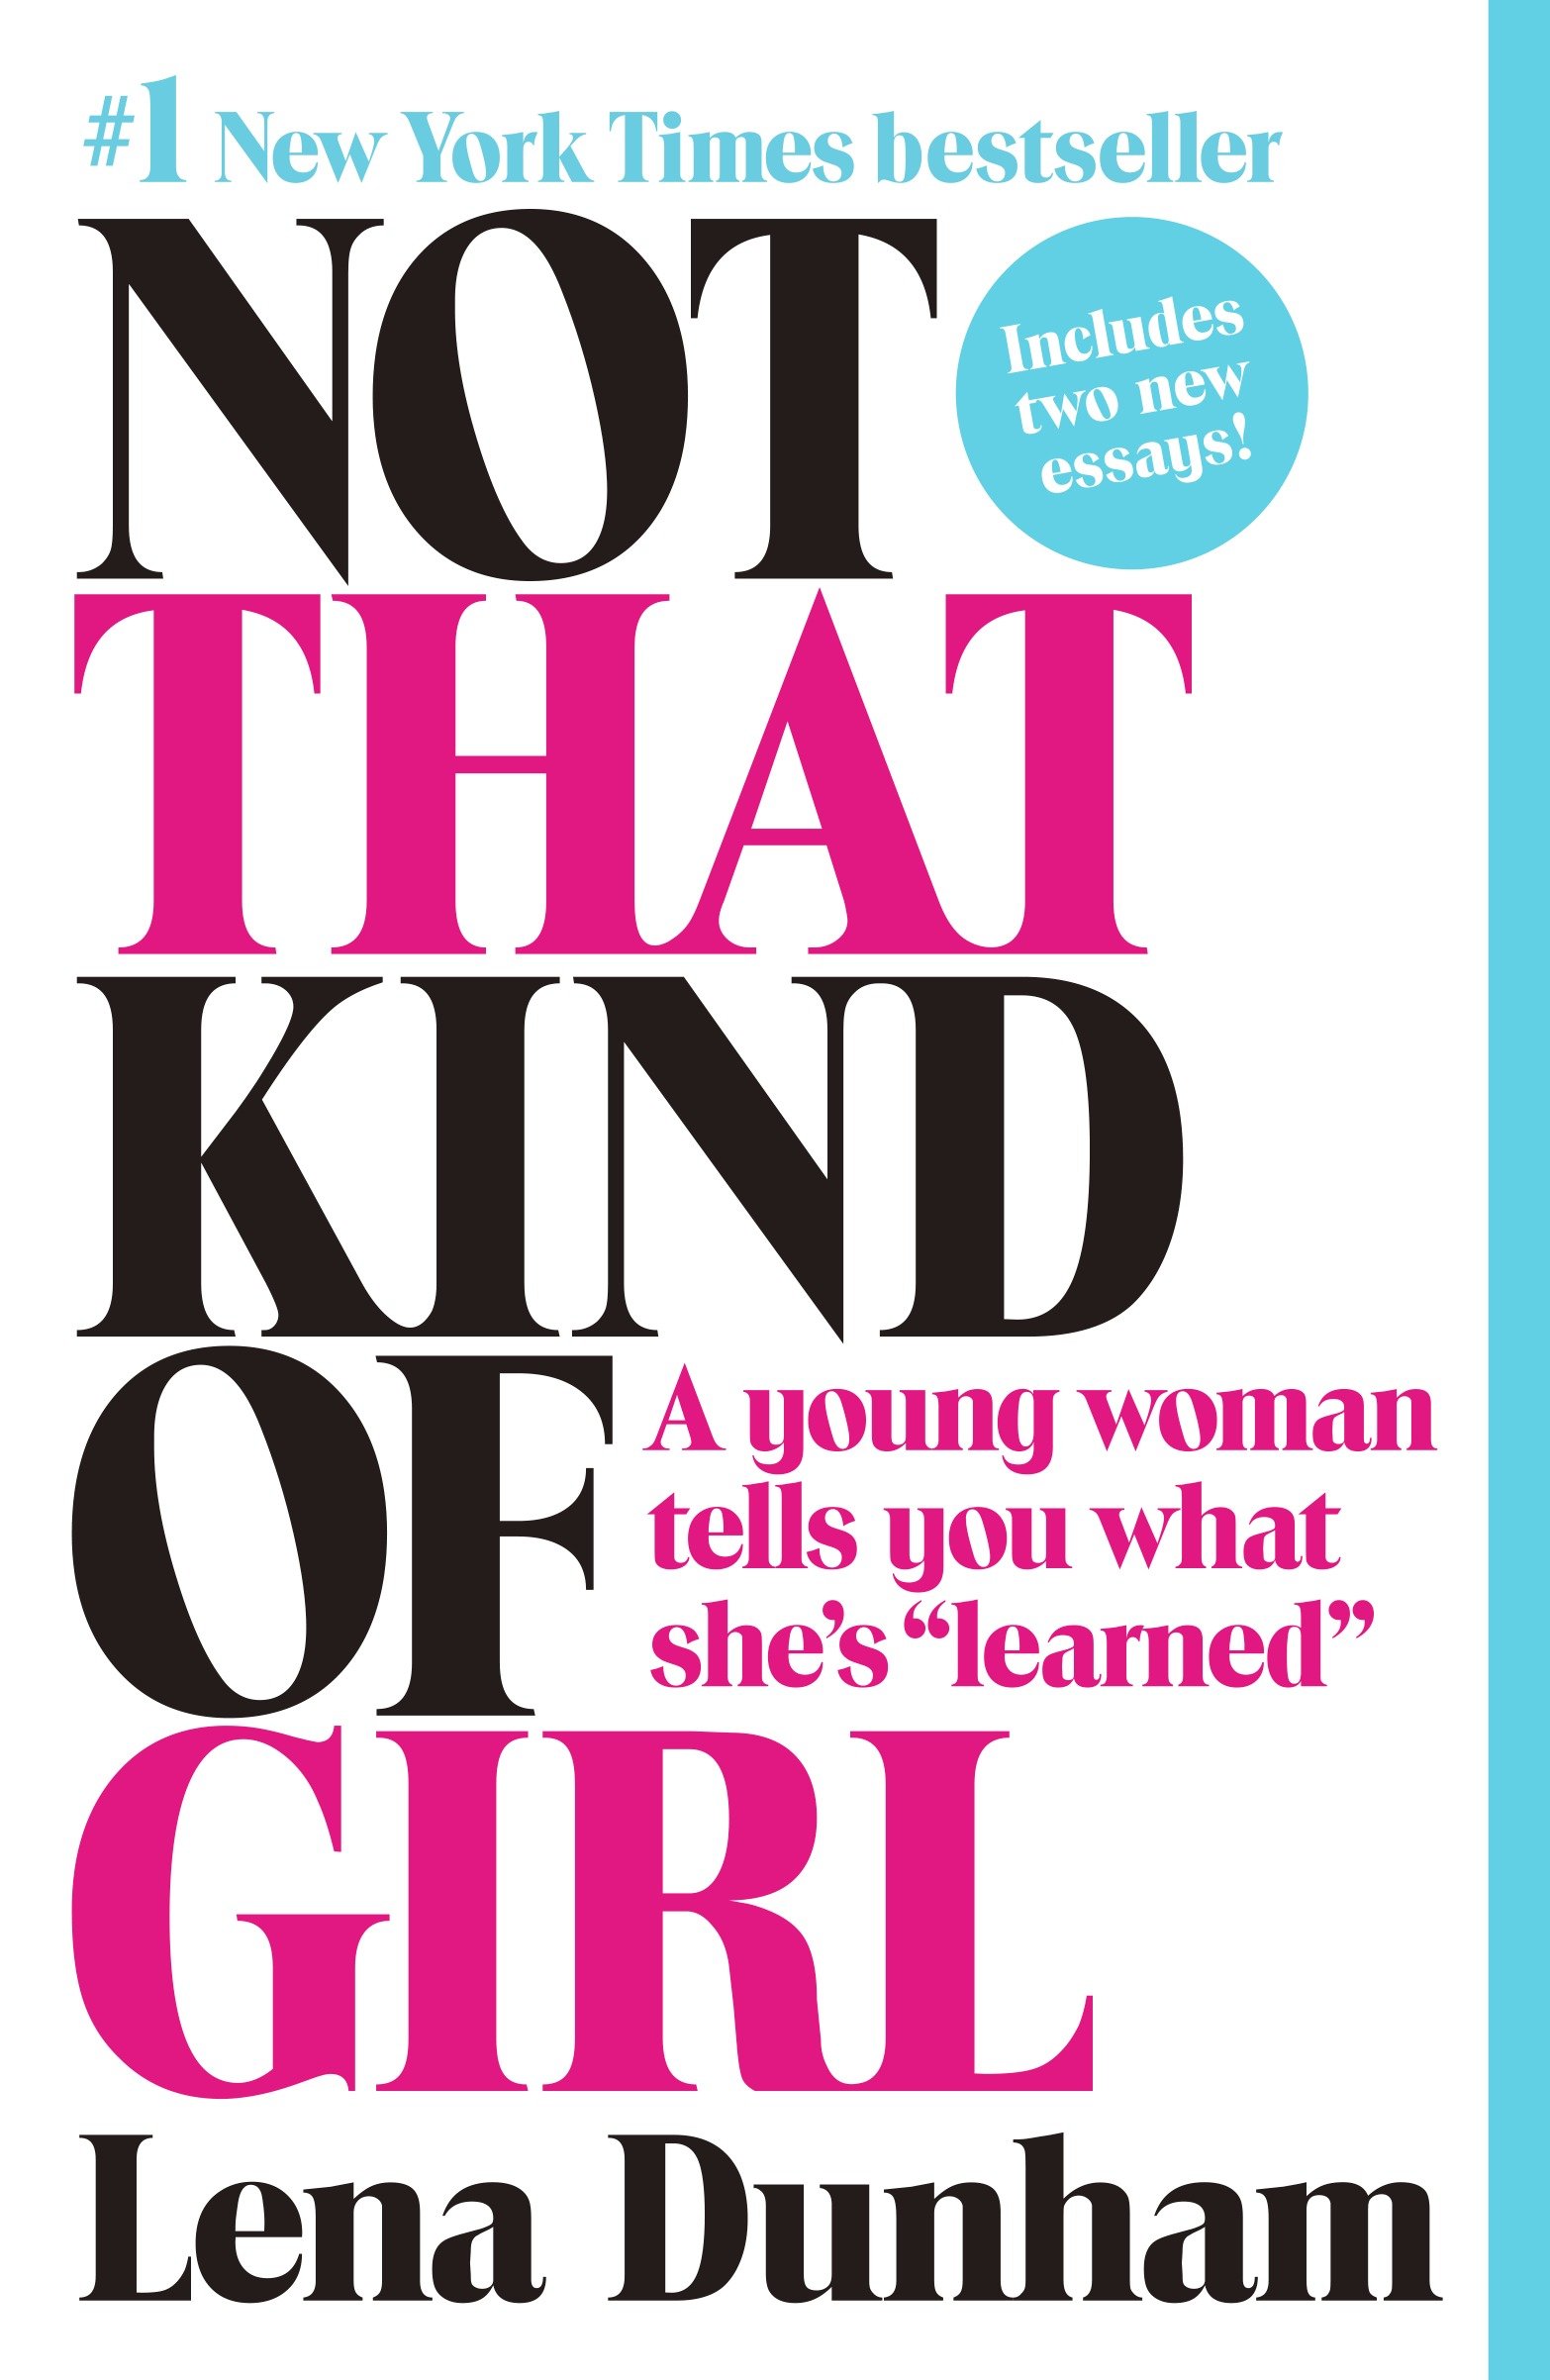 Not that kind of girl a young woman tells you what she's "Learned" cover image